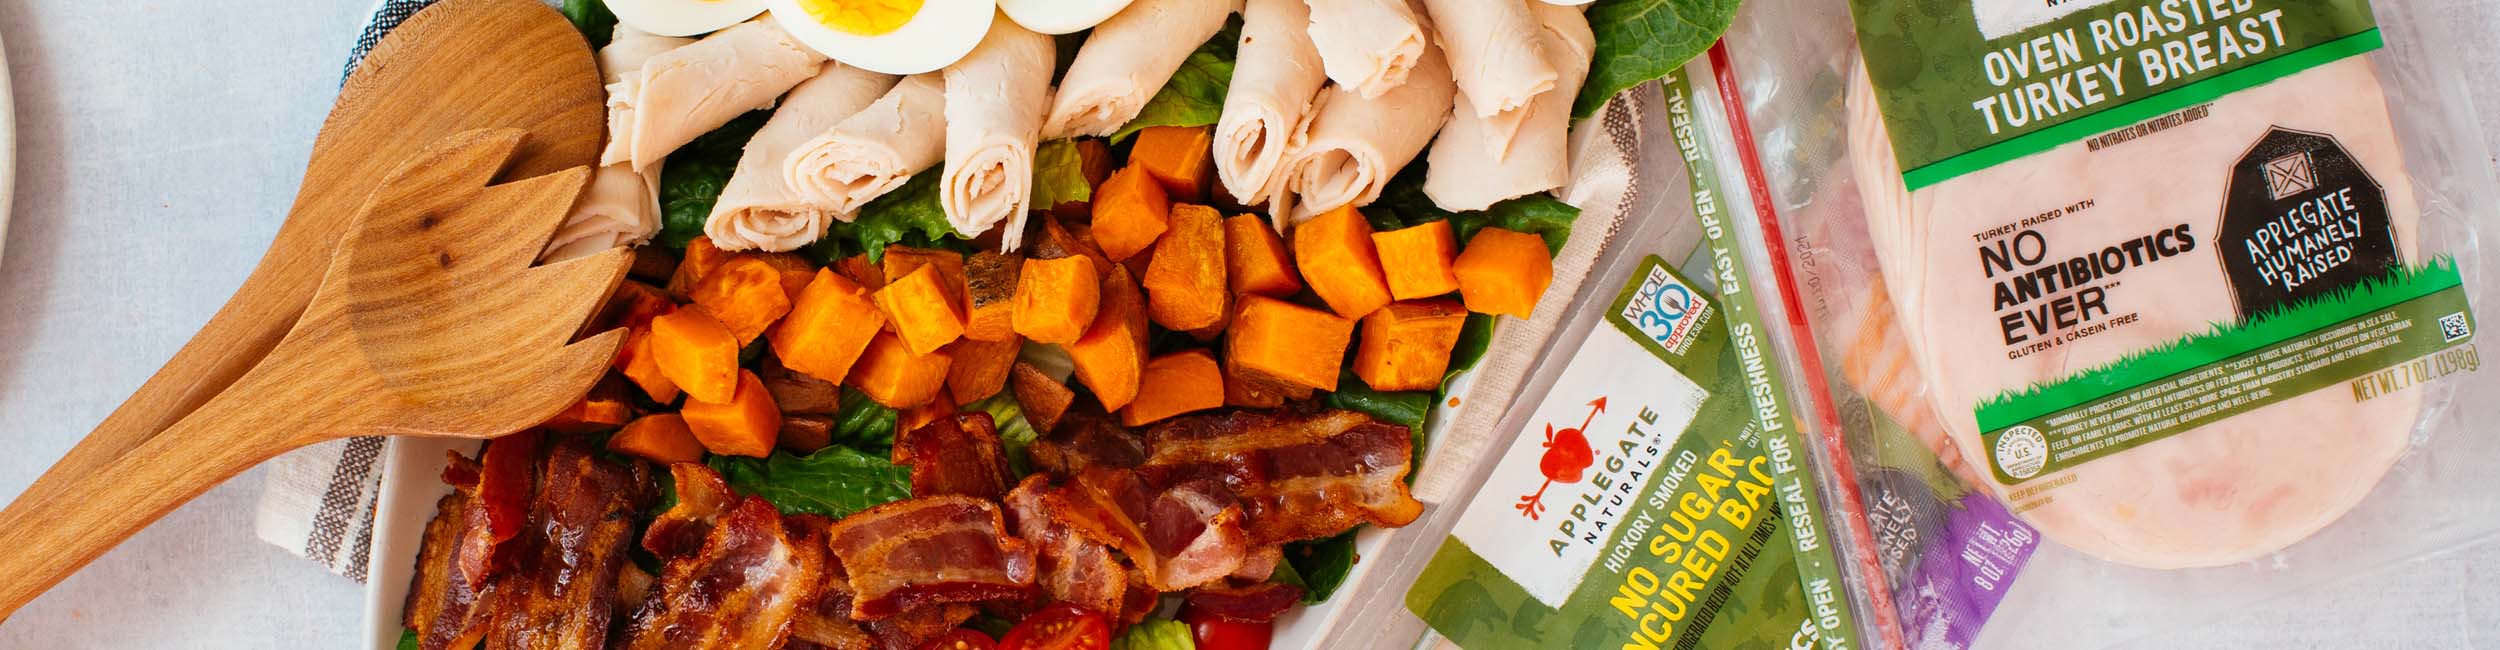 A colorful plate of vegetables and Applegate bacon and turkey slices.